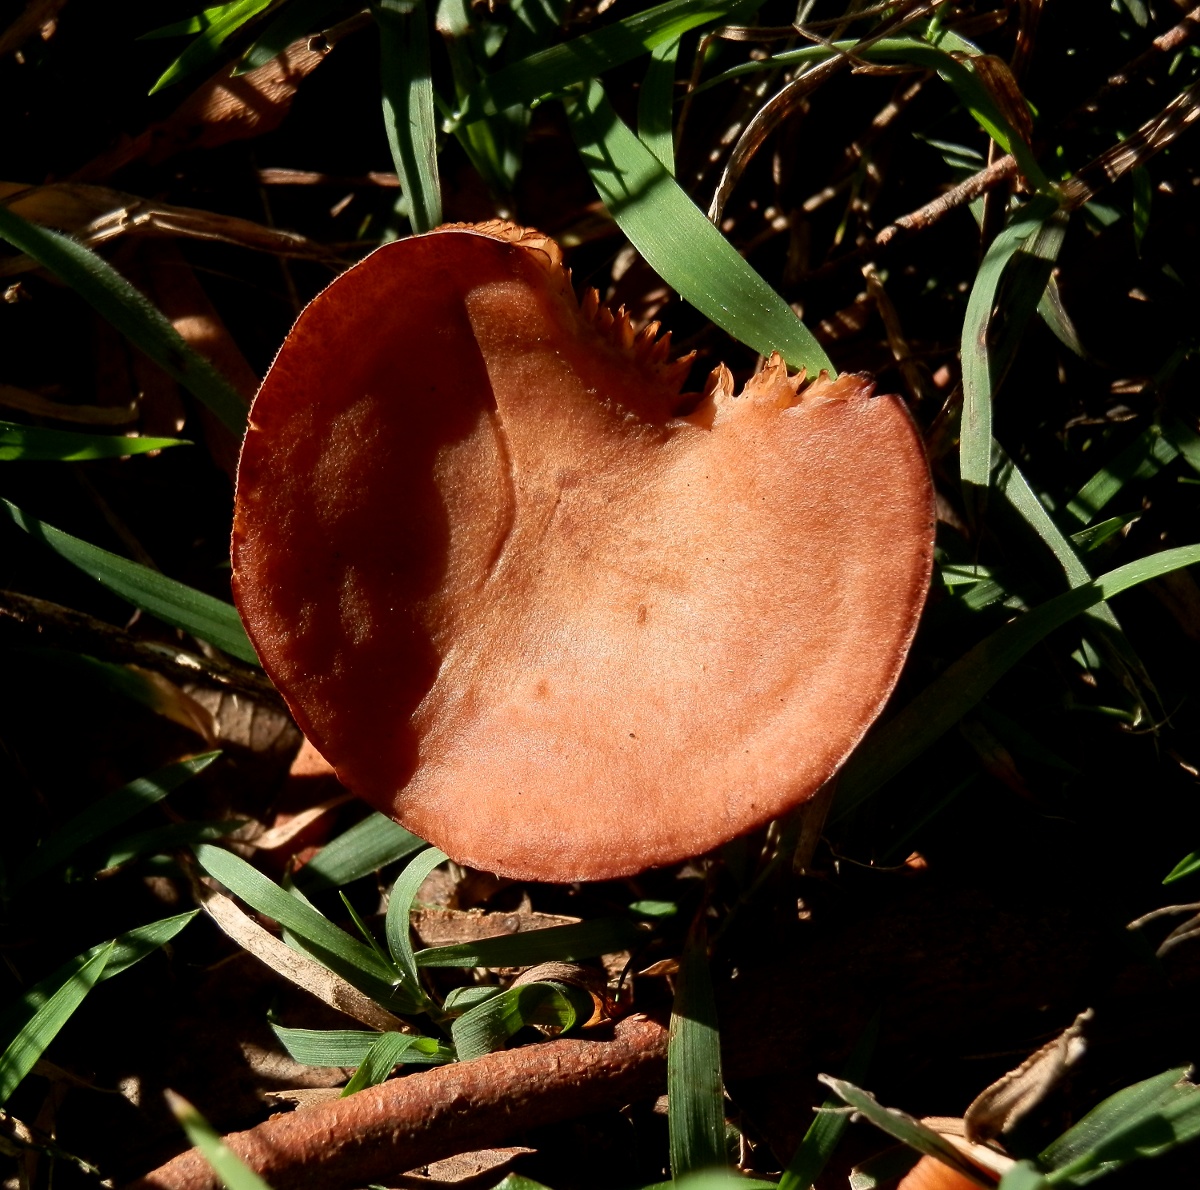 Unknown fungus